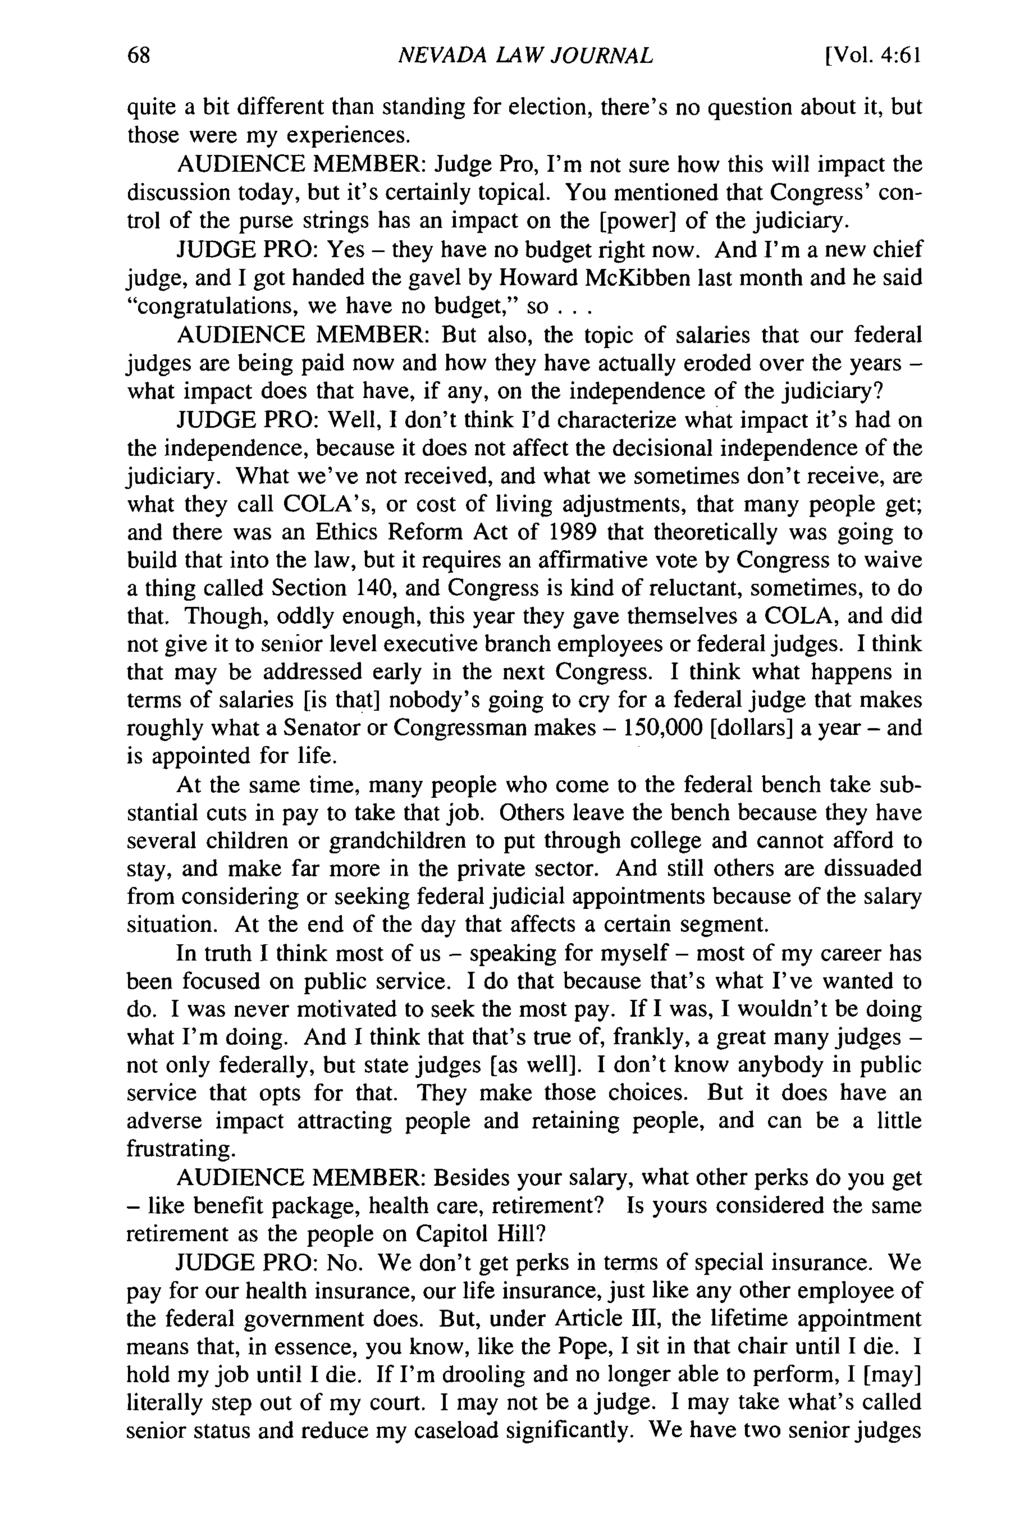 NEVADA LAW JOURNAL [Vol. 4:61 quite a bit different than standing for election, there's no question about it, but those were my experiences.